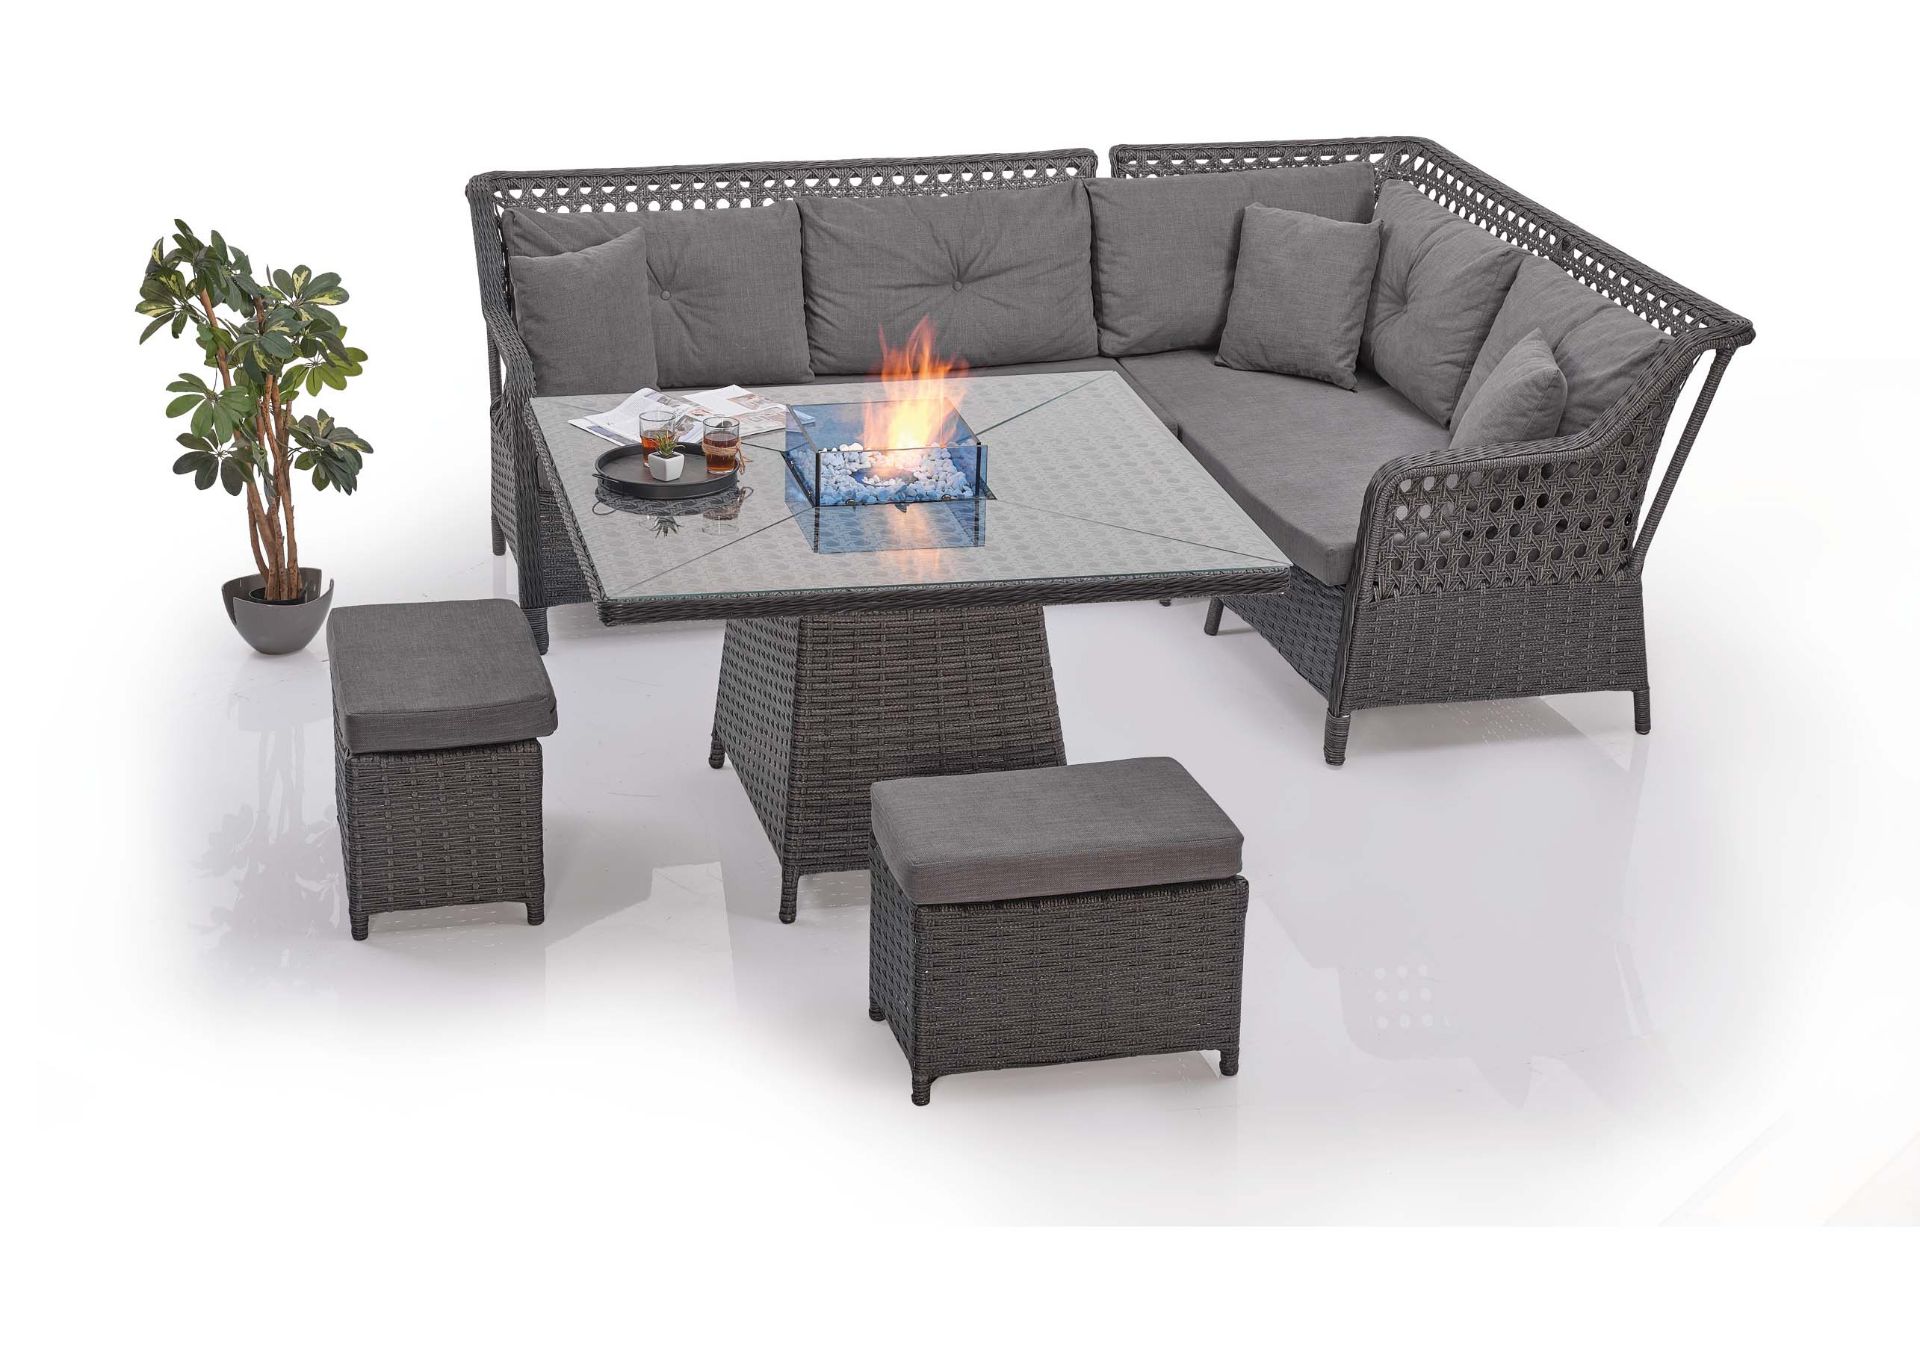 + VAT Brand New Chelsea Garden Company Babel Series 6 Seater Corner Dining Set With Ethanol Fire - Image 4 of 4